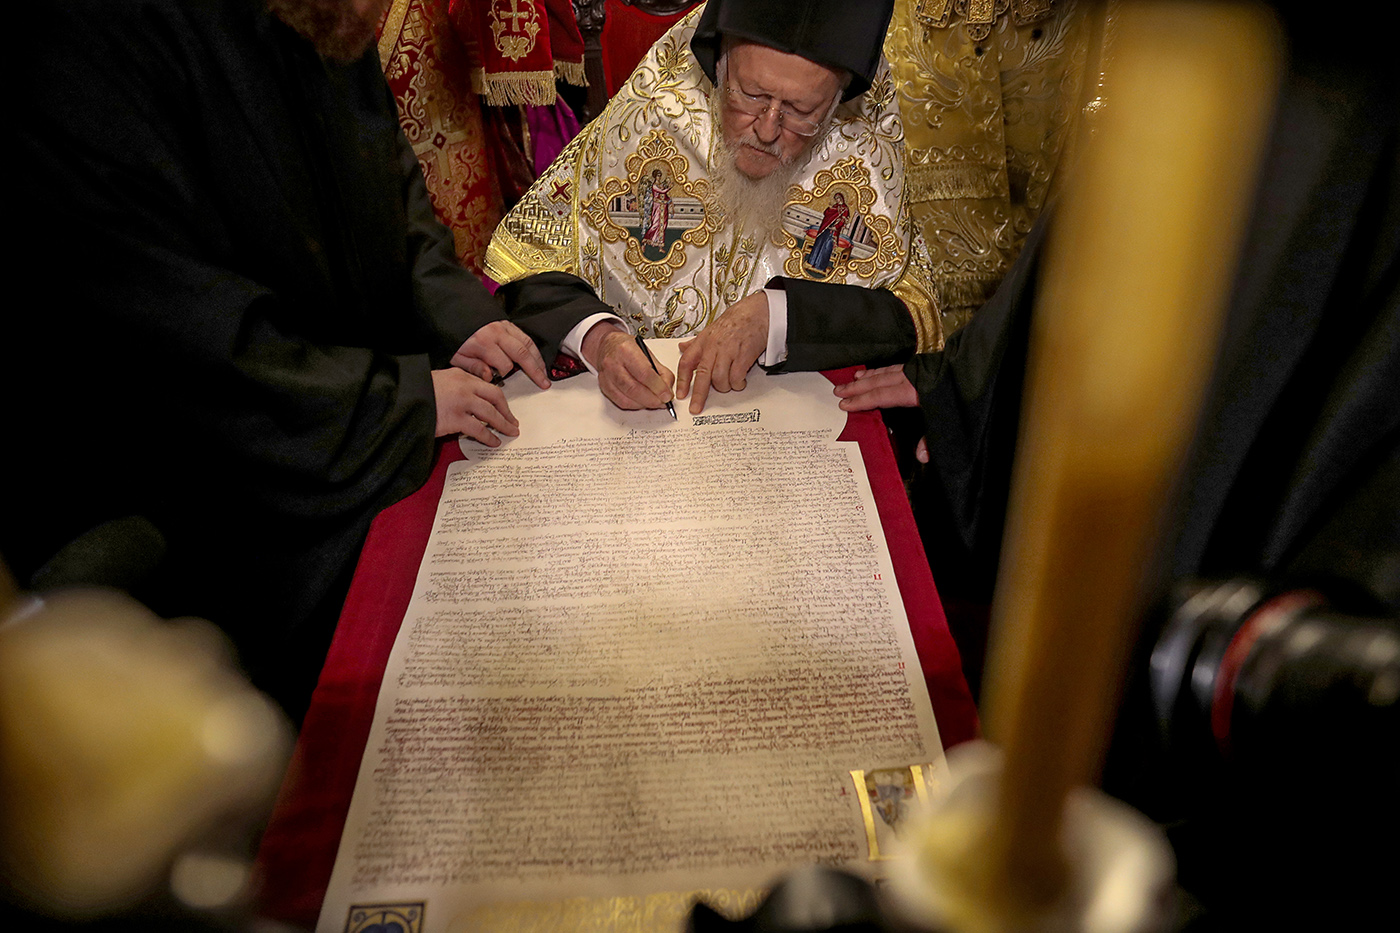  Ecumenical Patriarch Bartholomew I, a spiritual leader of the Orthodox Christians around the world, signs the Tomos of autocephaly for giving to Bishop of the Ukrainian Orthodox Church of the Kyiv Patriarchate, Metropolitan of Pereiaslav and Bila Tserkva Epifaniy (Serhiy Dumenko) (not pictured) during the ceremony at St George Church in Istanbul, 05 January 2019. 